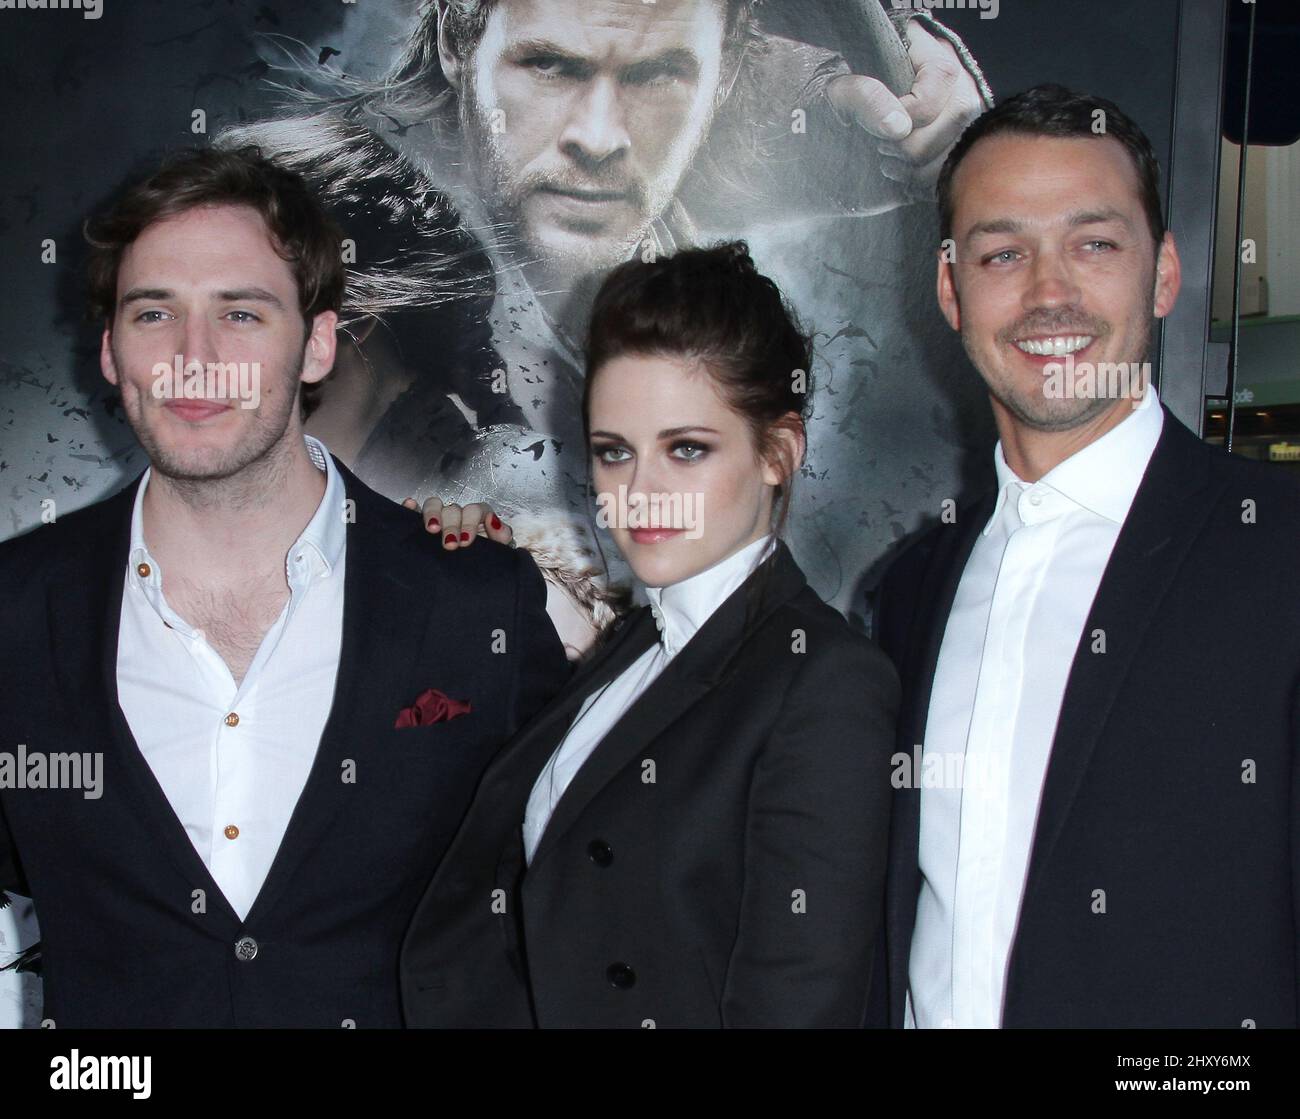 Sam Claflin, Kristen Stewart and Rupert Sanders attends the 'Snow White and the Huntsman' Los Angeles screening held at the Westwood Village Theatre. Stock Photo